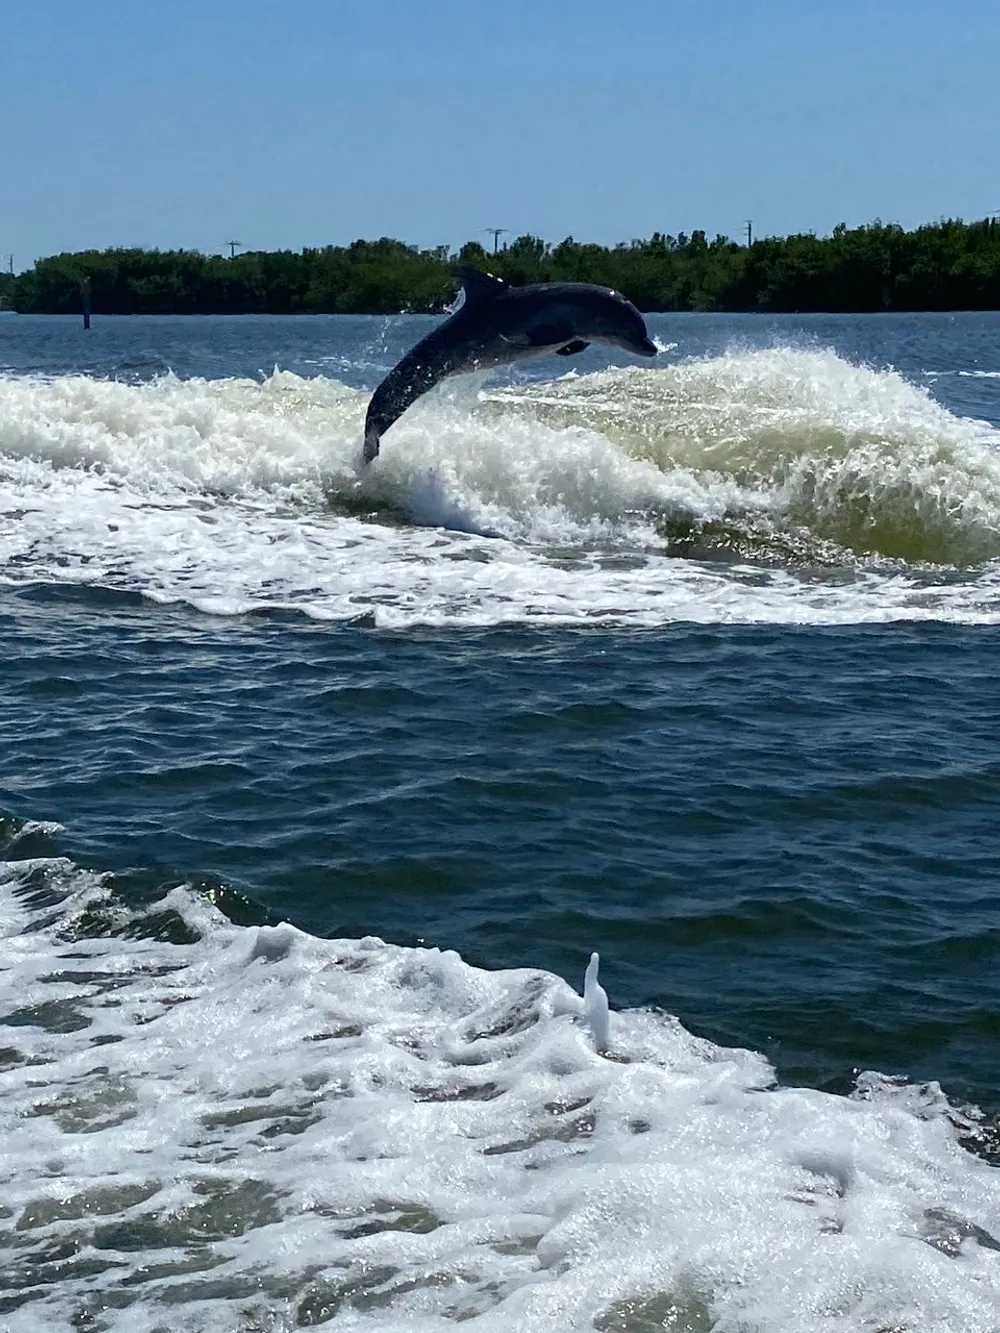 A dolphin is leaping out of the water creating a dynamic splash against a backdrop of water and vegetation